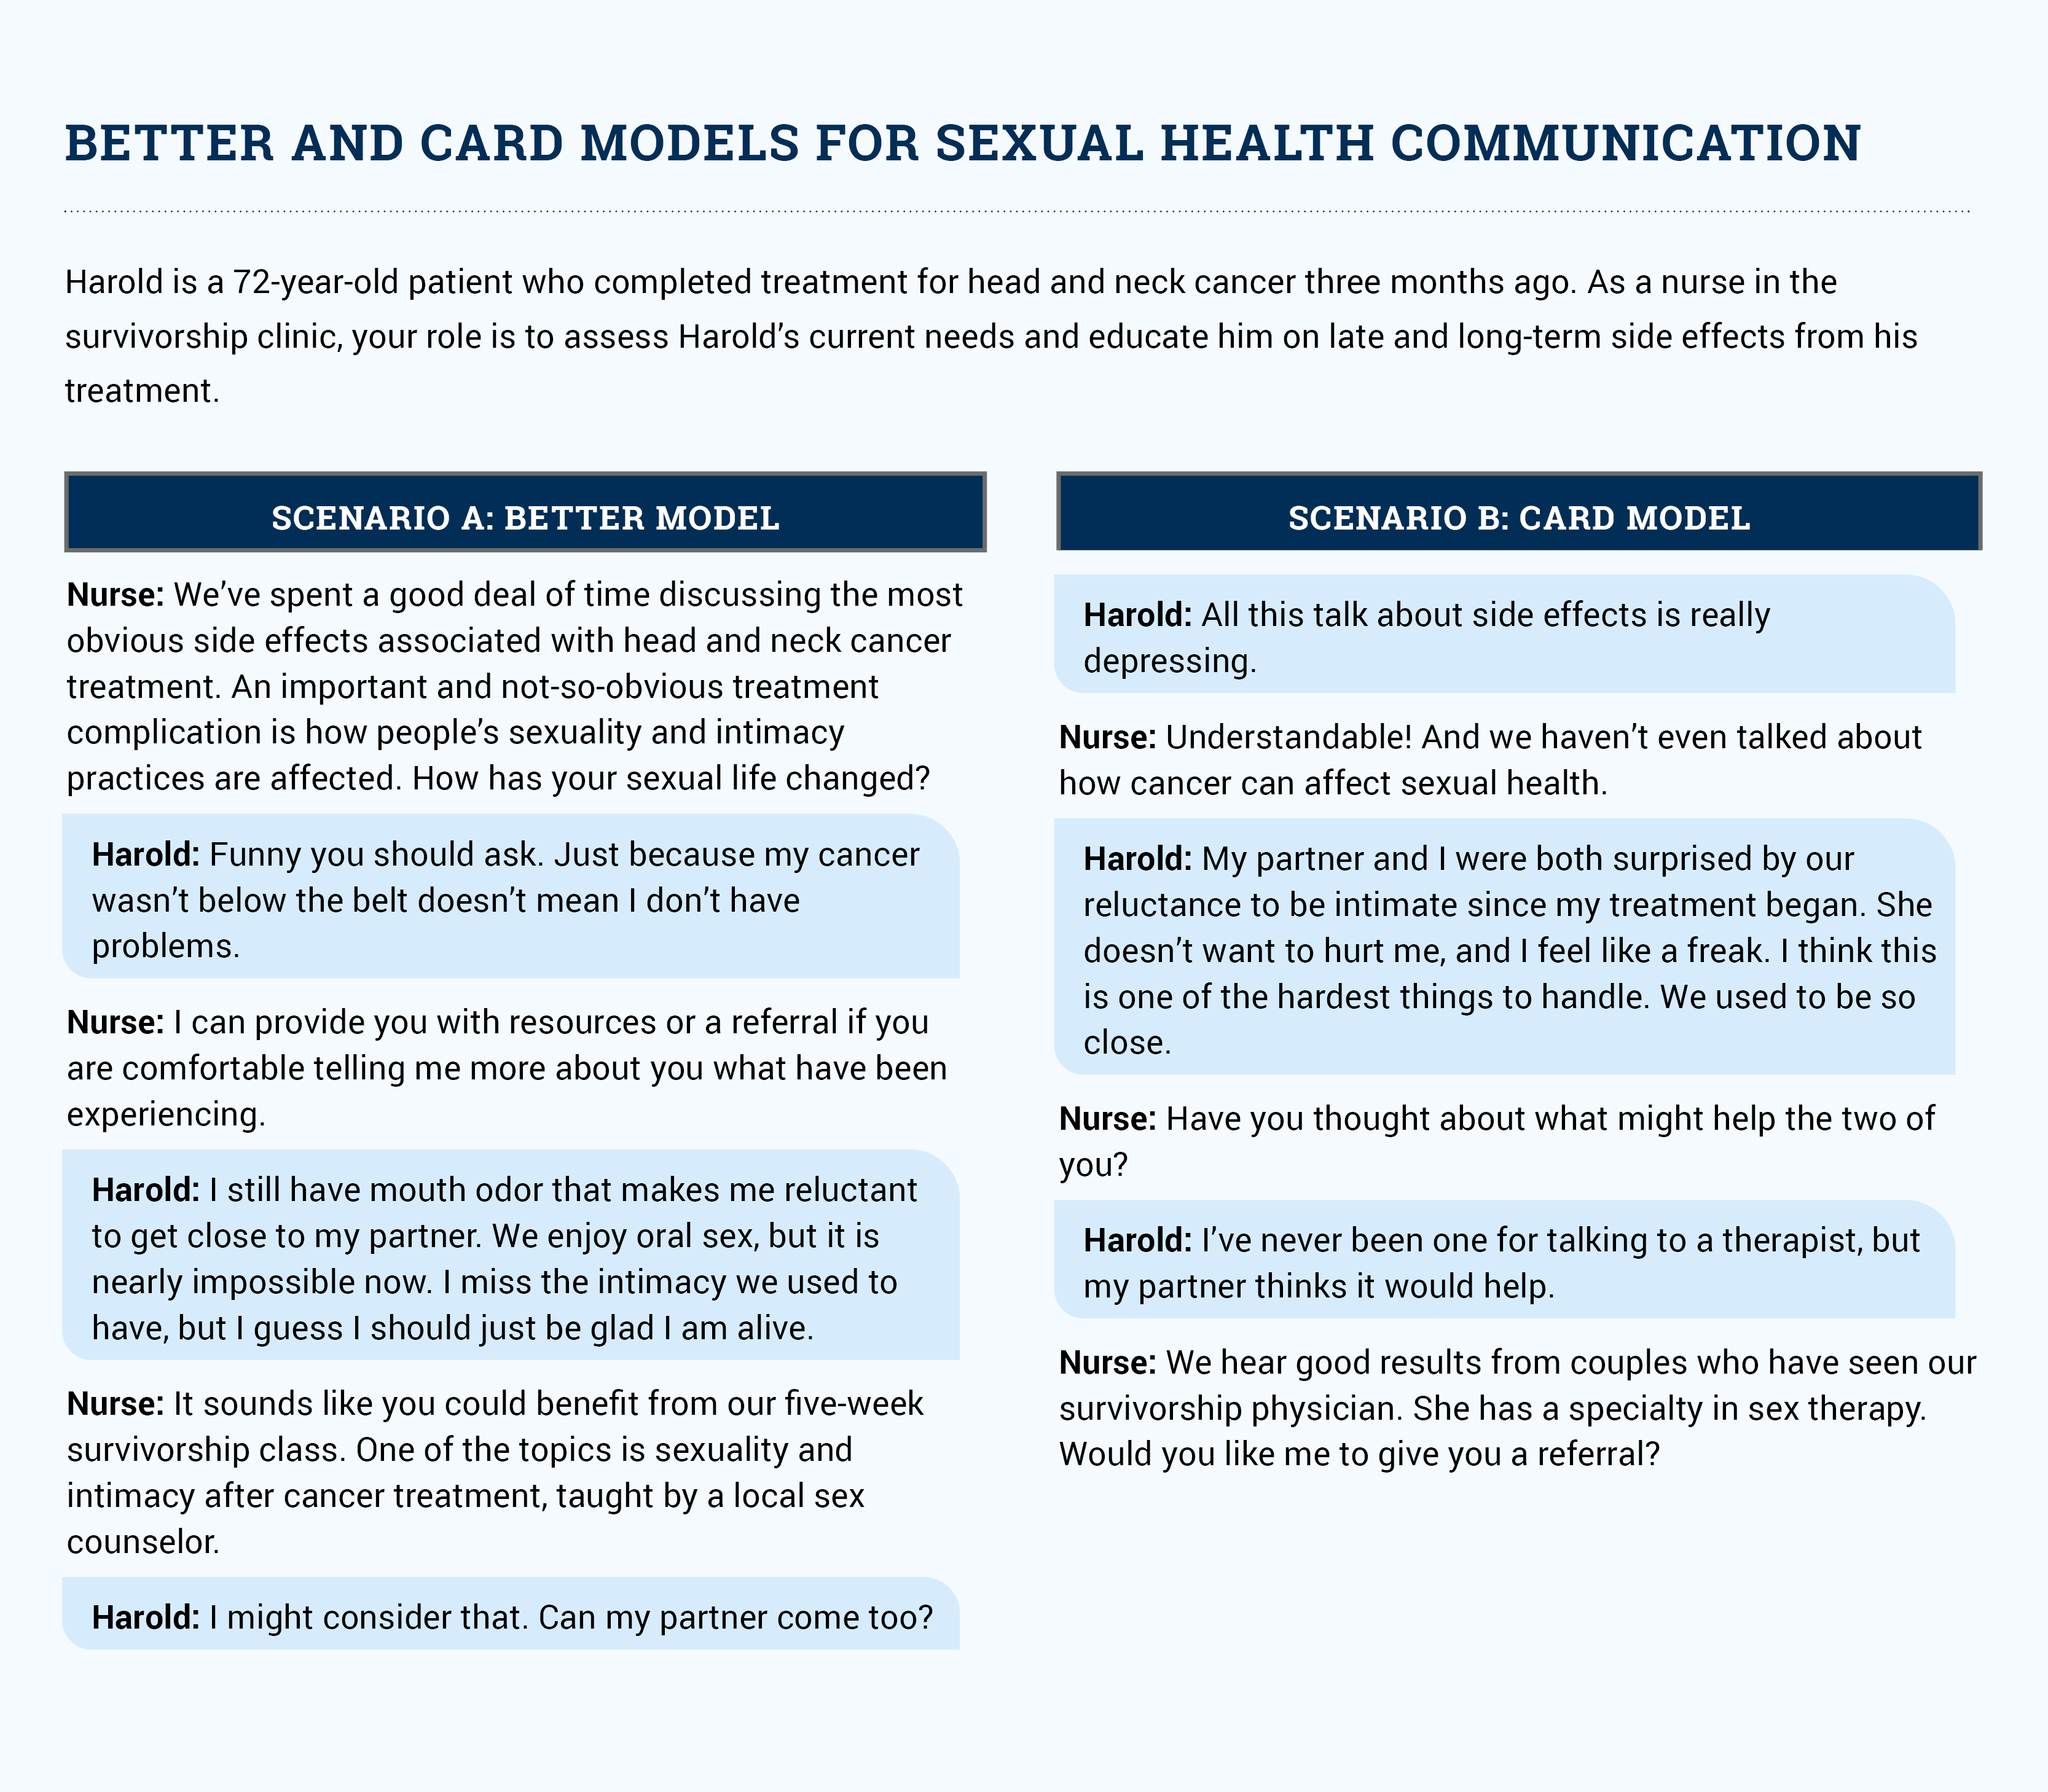 Communication Models Help Nurses Confidently Address Sexual Concerns in Patients With Cancer